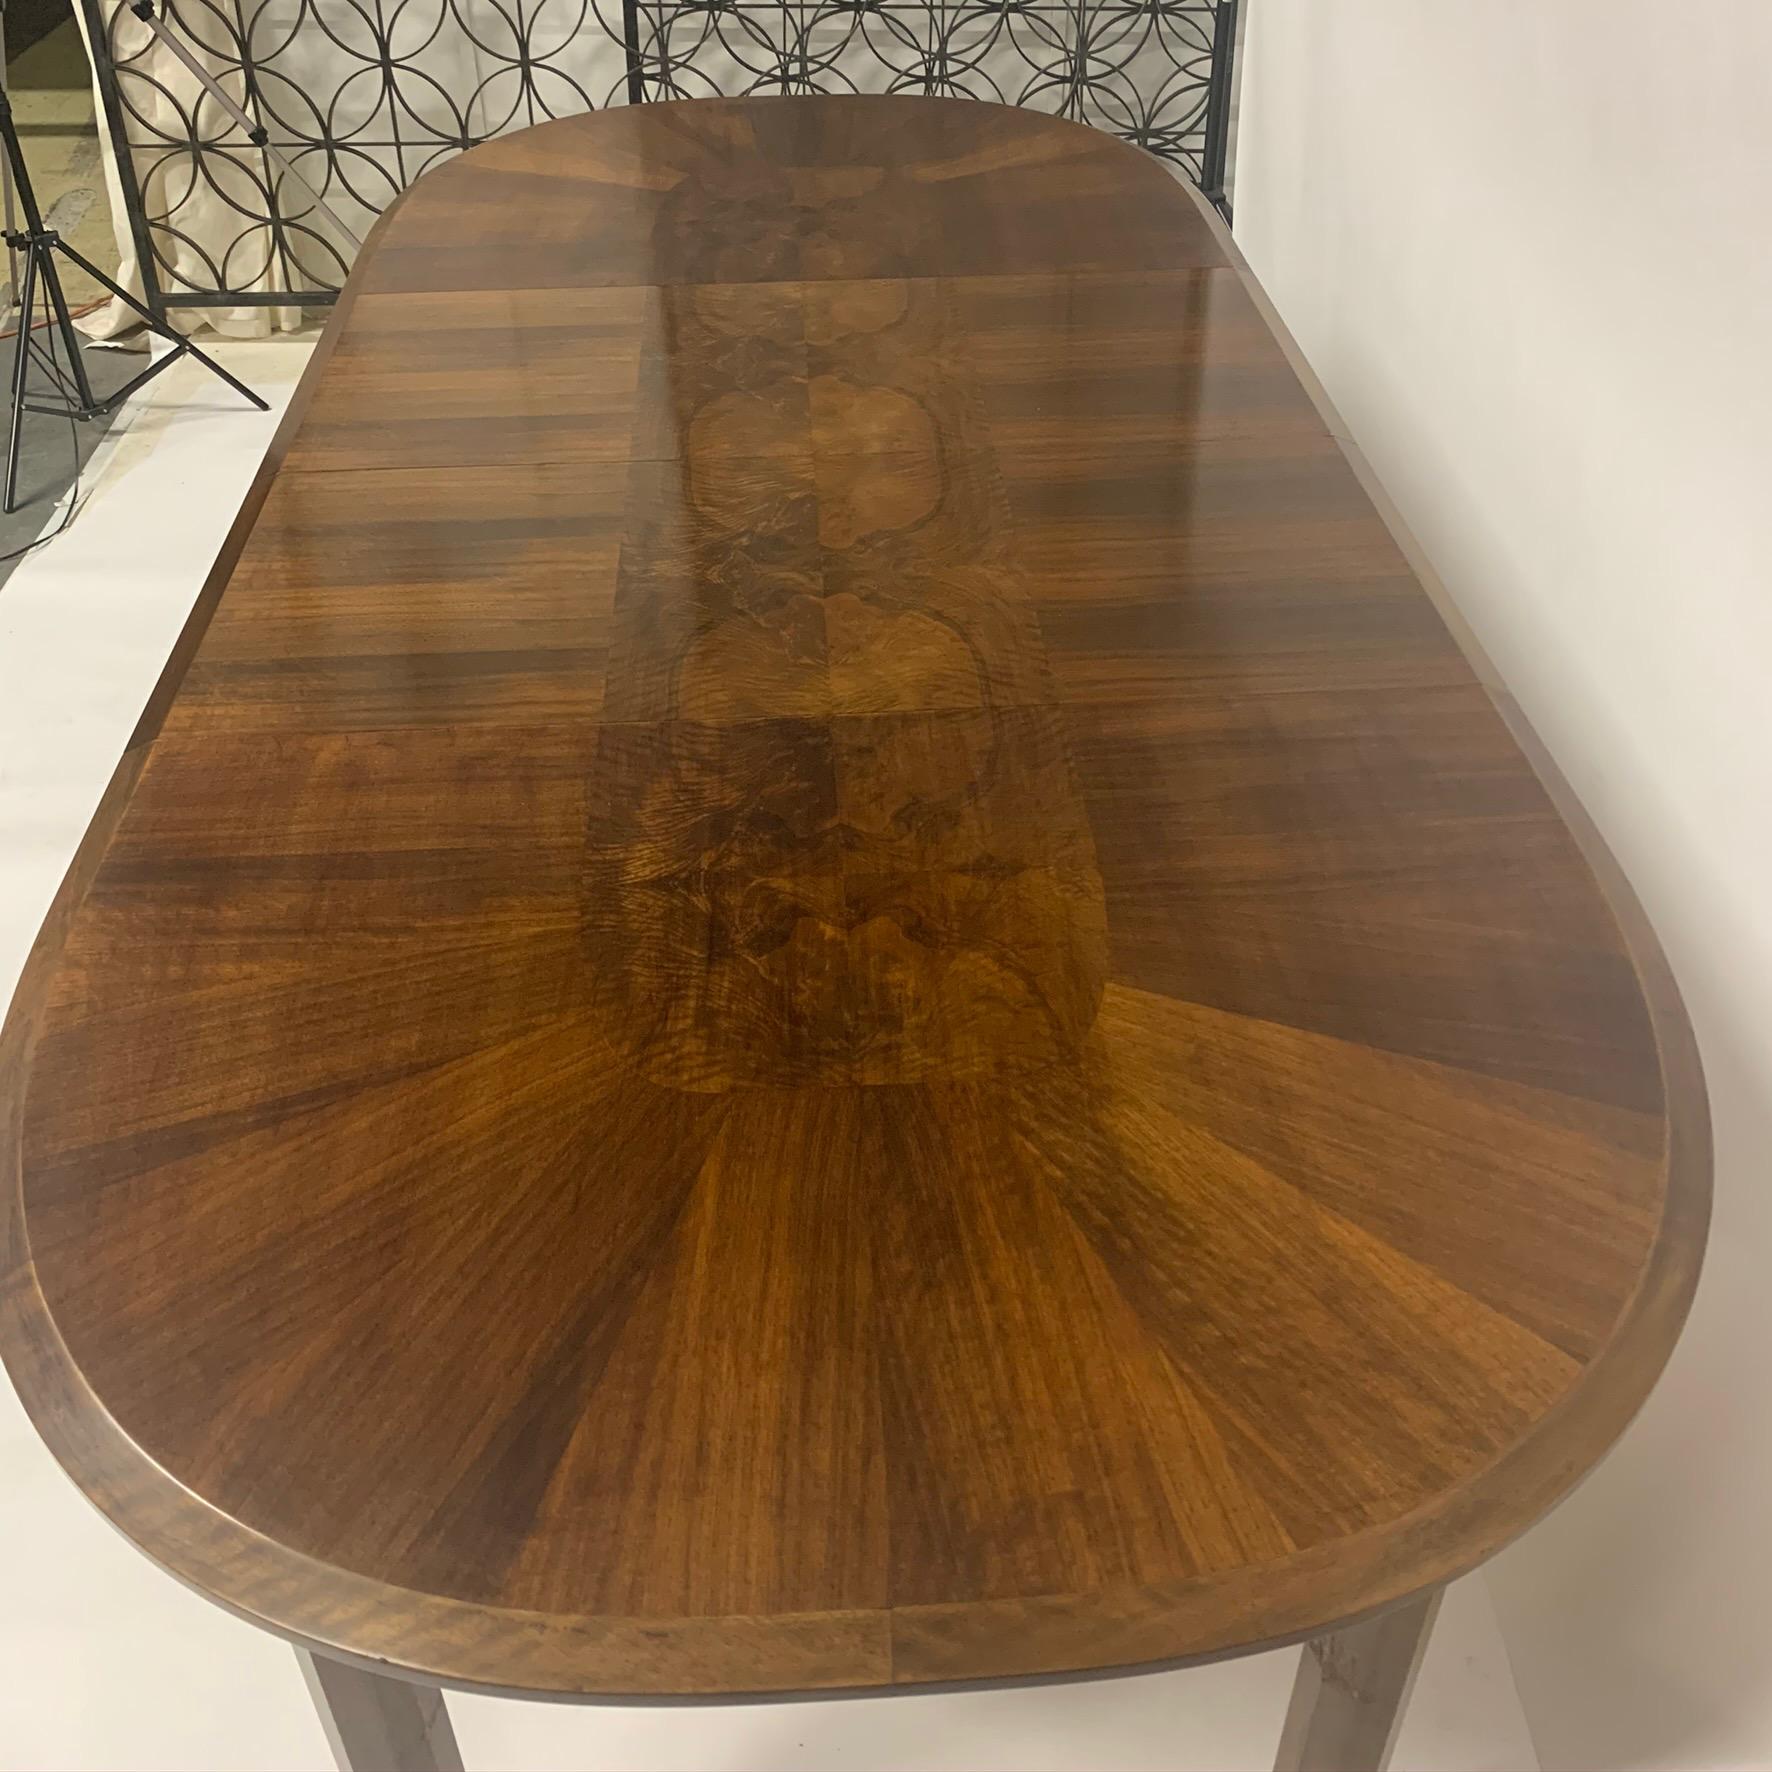 Absolutely stunning and hard to find Edmond J. Spence Dining table of mixed woods. The subtle detailing on this piece is incredible. The tabletop has a burled inlaid center detail with a walnut decorative design. The legs appear to be solid